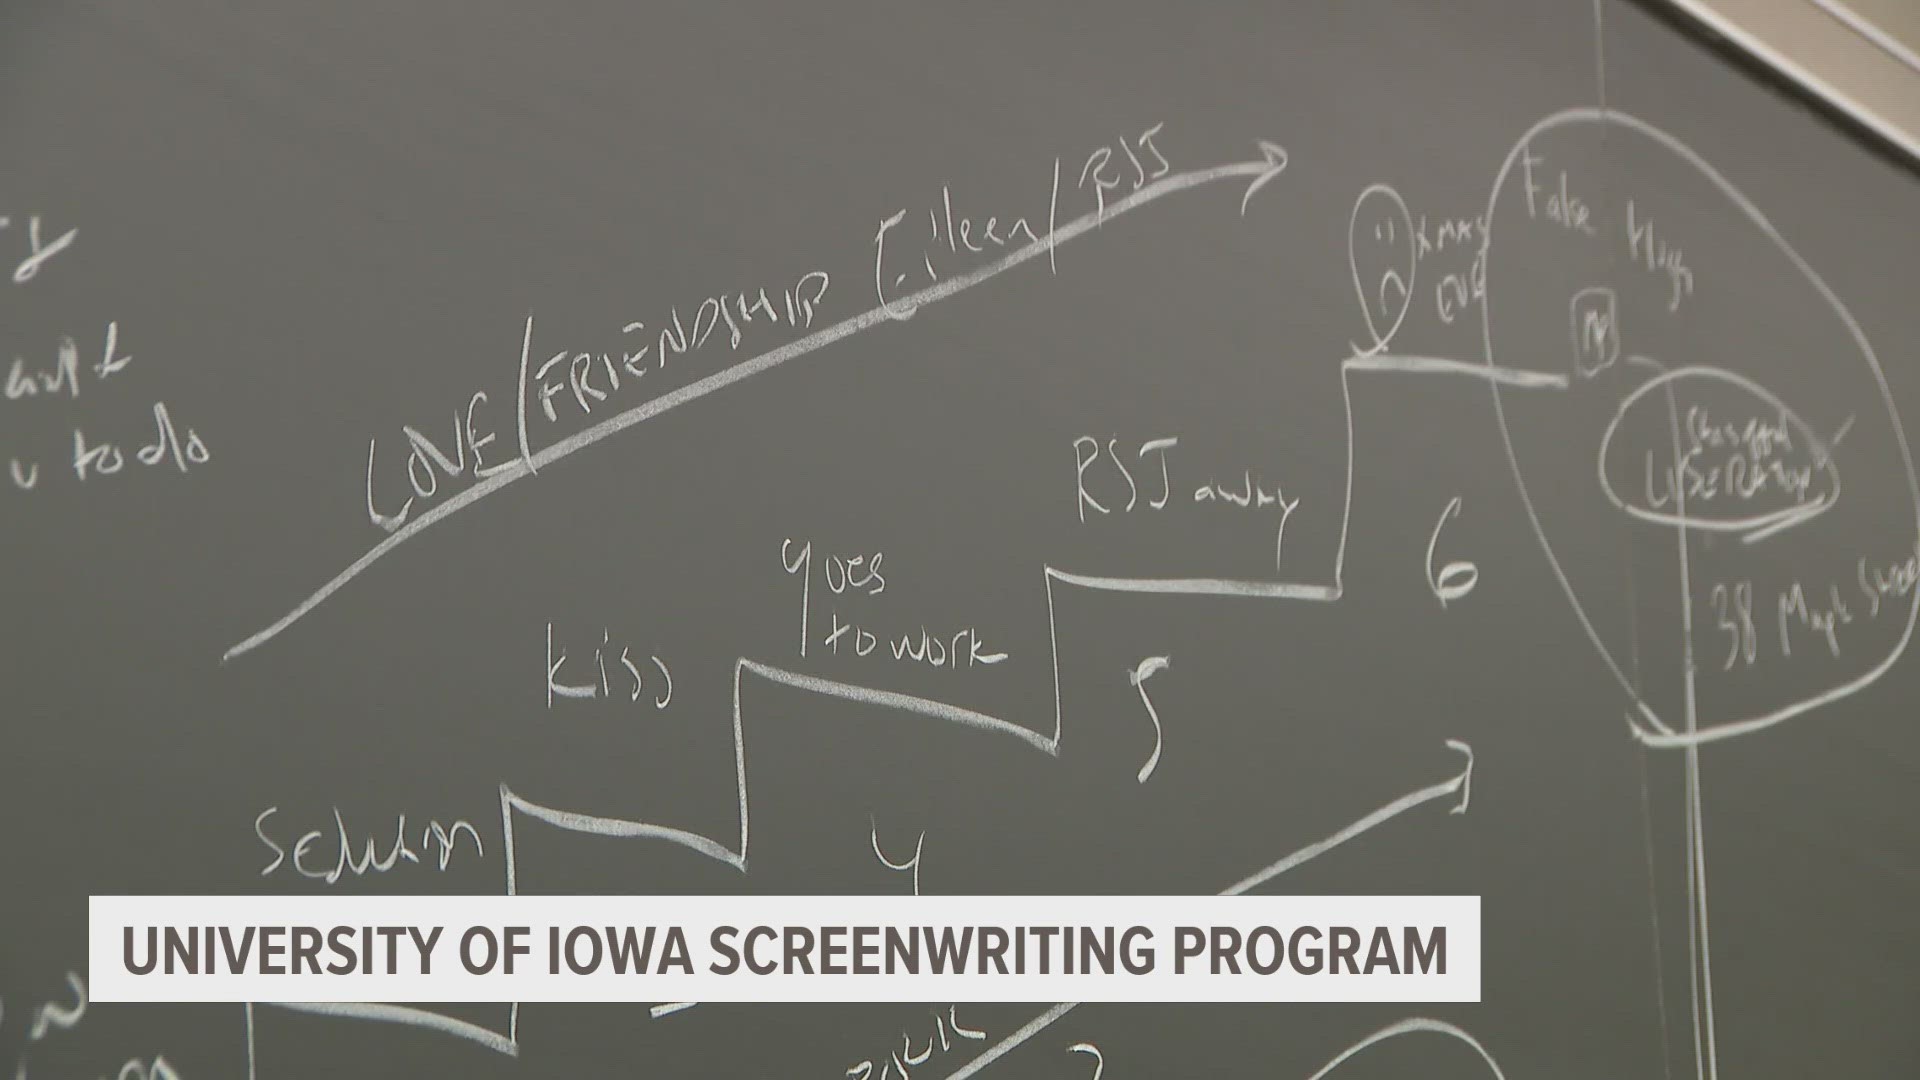 Dean Bakopoulos is the head of screenwriting at the University of Iowa. In 2020, the school began it's new Dynamic Screenwriting program.